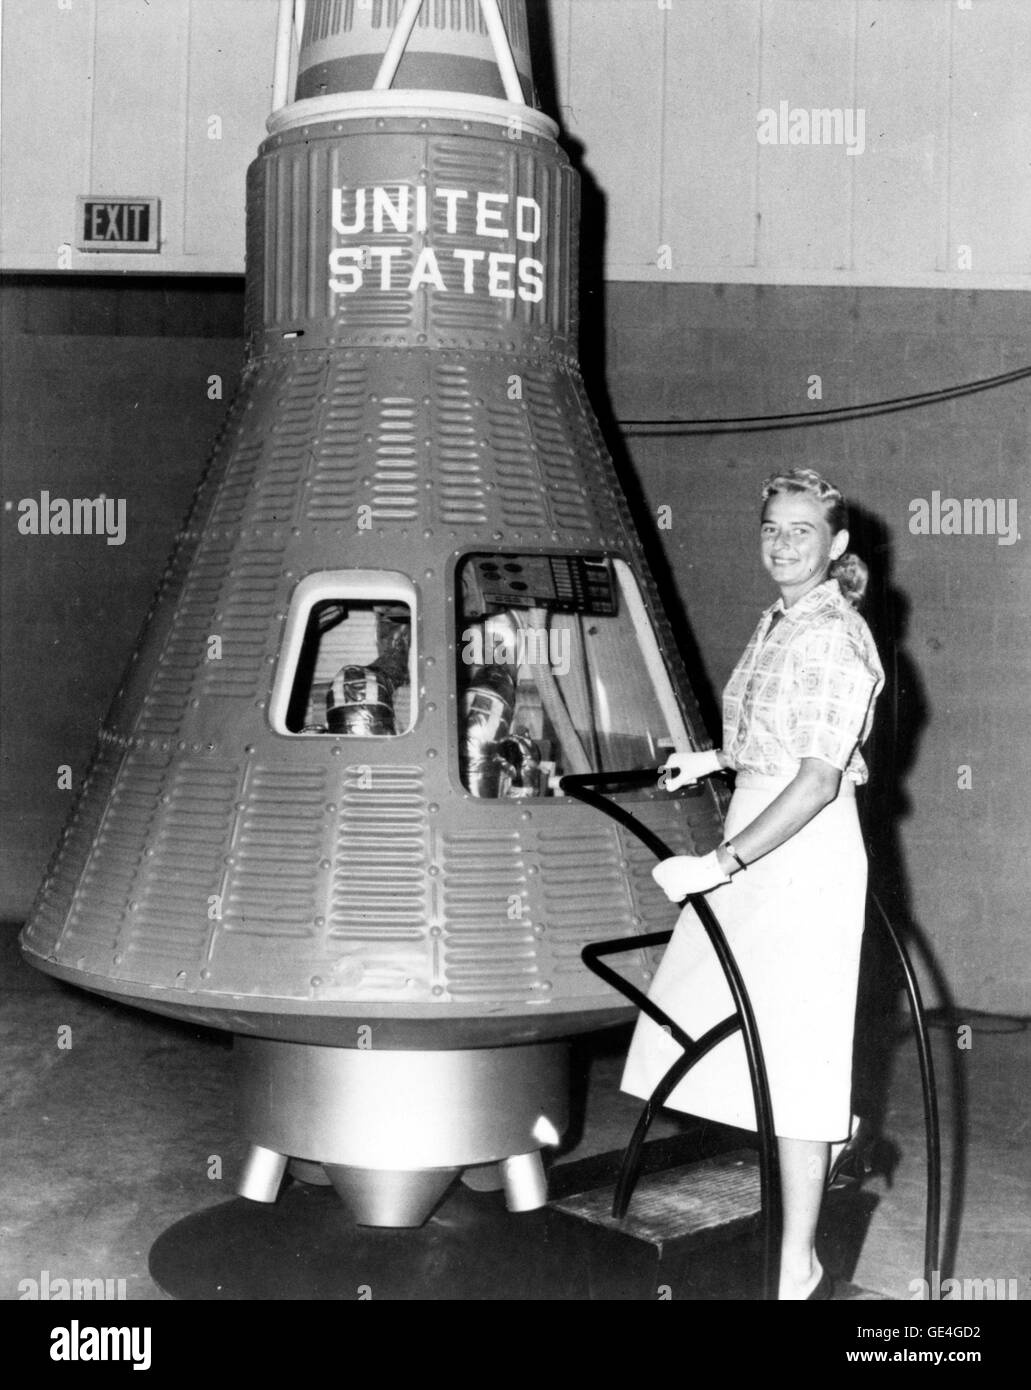 Jerrie Cobb poses next to a Mercury spaceship capsule. Although she never flew in space, Cobb, along with twenty-four other women, underwent physical tests similar to those taken by the Mercury astronauts with the belief that she might become an astronaut trainee. All the women who participated in the program, known as First Lady Astronaut Trainees, were skilled pilots. Dr. Randy Lovelace, a NASA scientist who had conducted the official Mercury program physicals, administered the tests at his private clinic without official NASA sanction. Cobb passed all the training exercises, ranking in the  Stock Photo